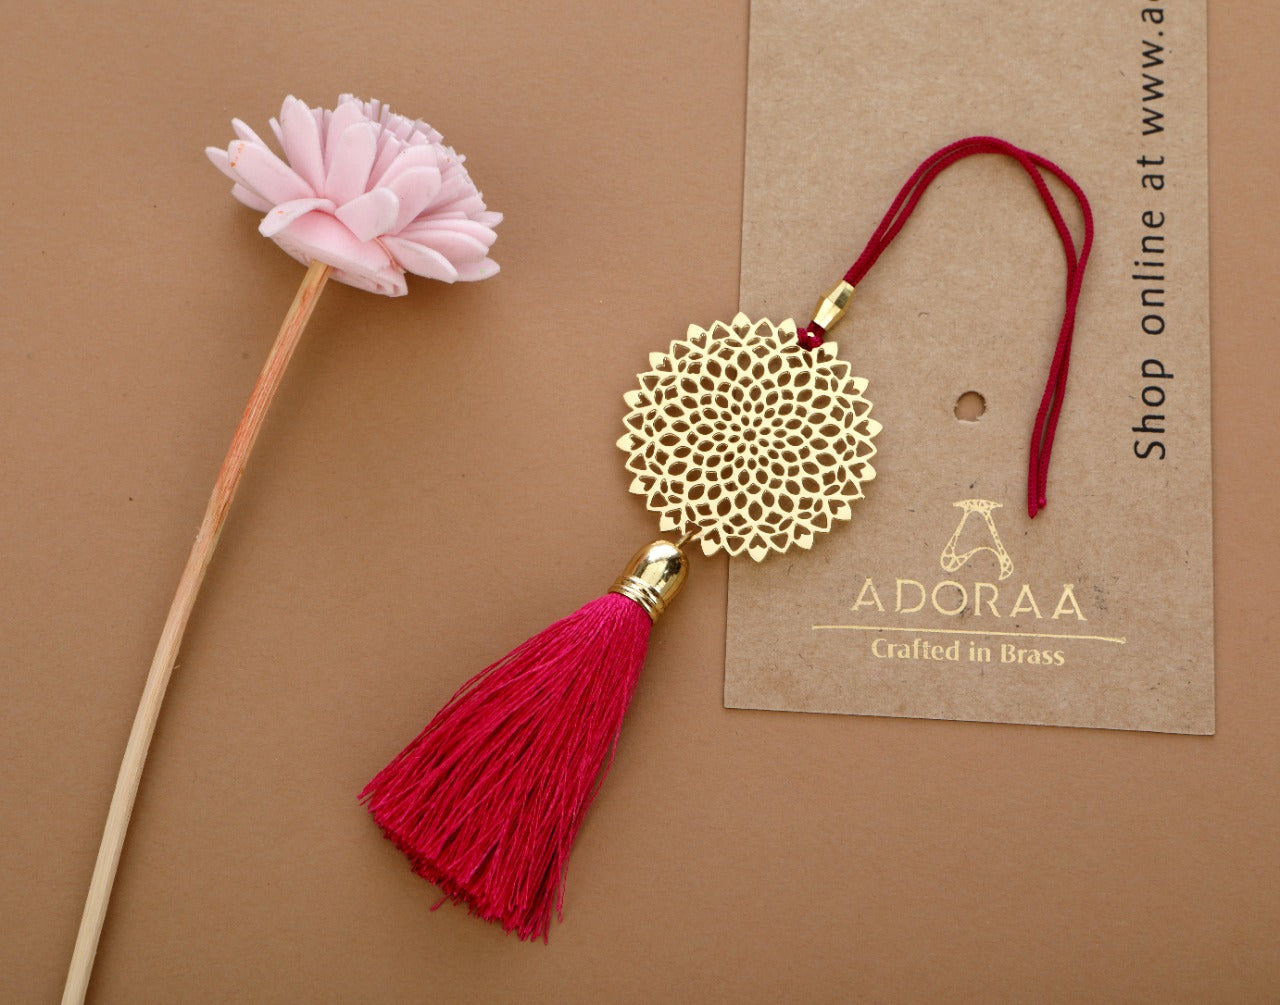 ADORAA's Lotus design Rakhi for bhabi with red hanging tassel cum keychain ring crafted in brass with golden finish